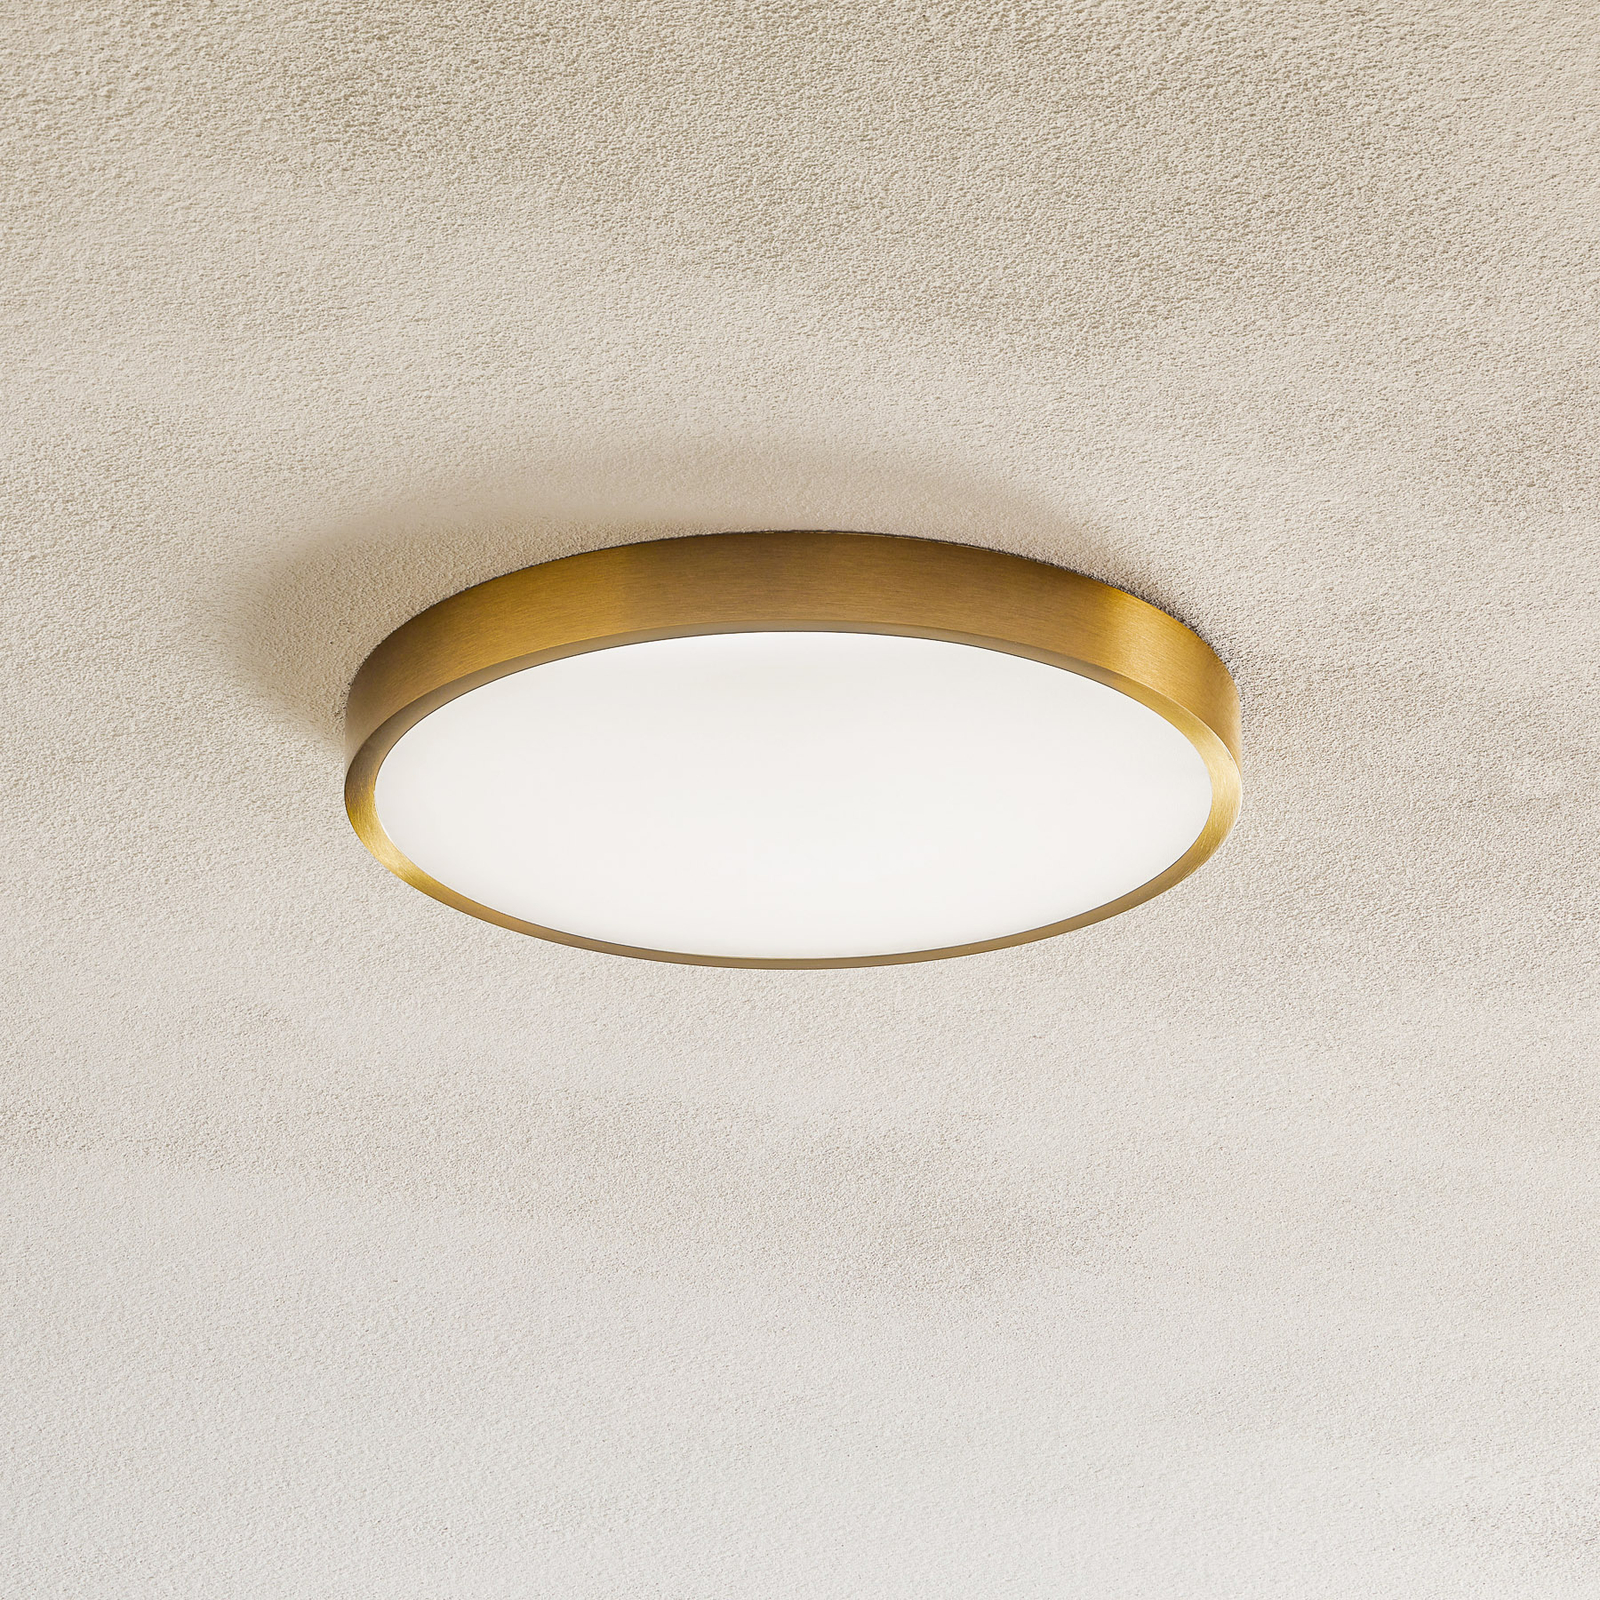 Bully LED ceiling light with a patina look, 24 cm